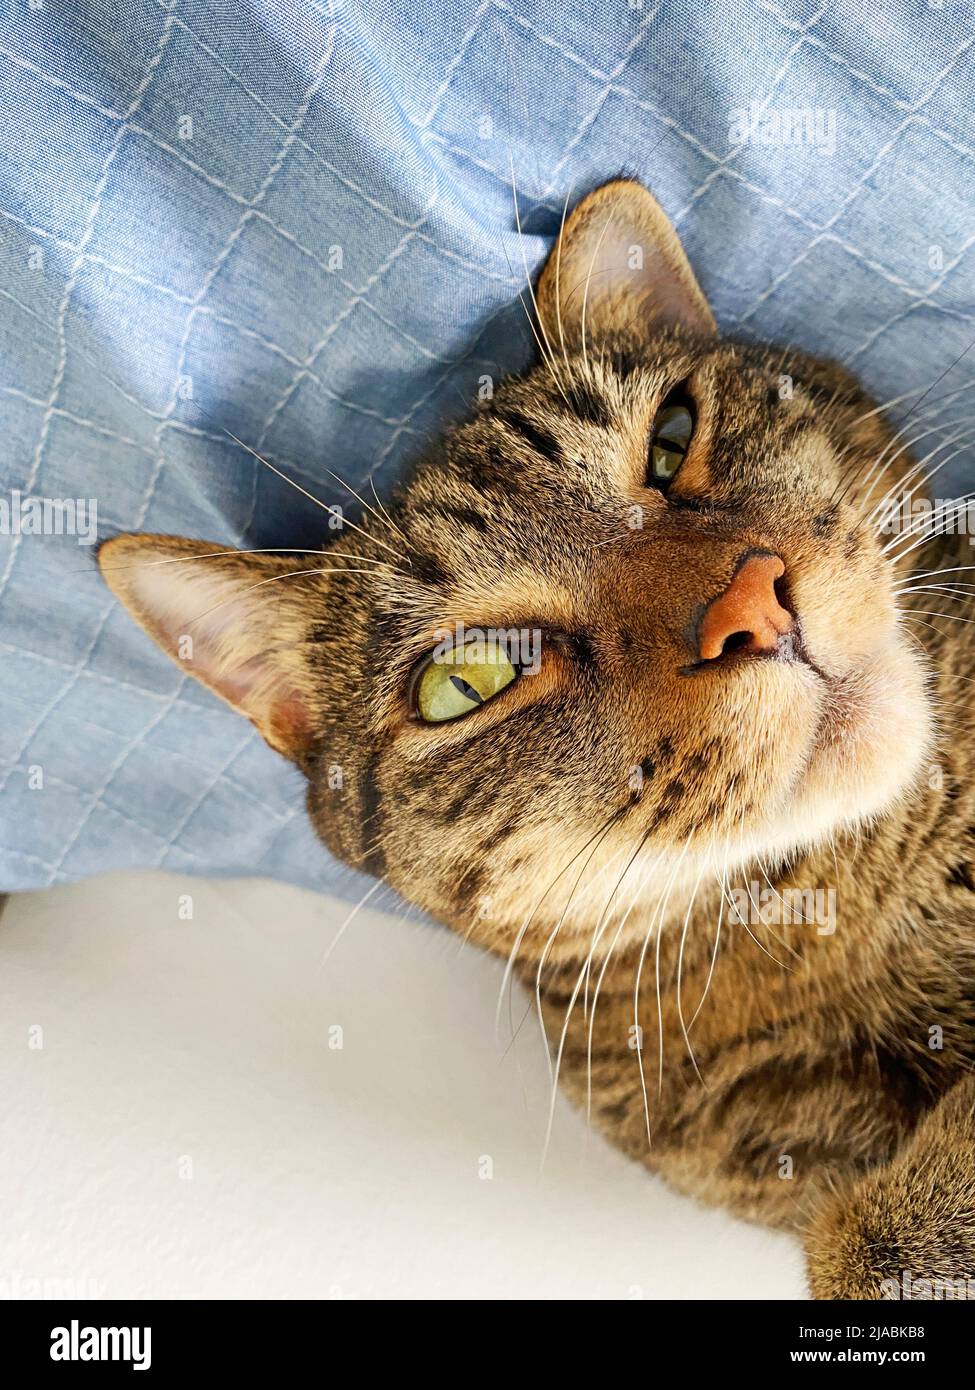 Kitten thinking. Lying on sheets and relaxed, the cat has a more closed eye and reproduces a feeling of thoughts. Stock Photo